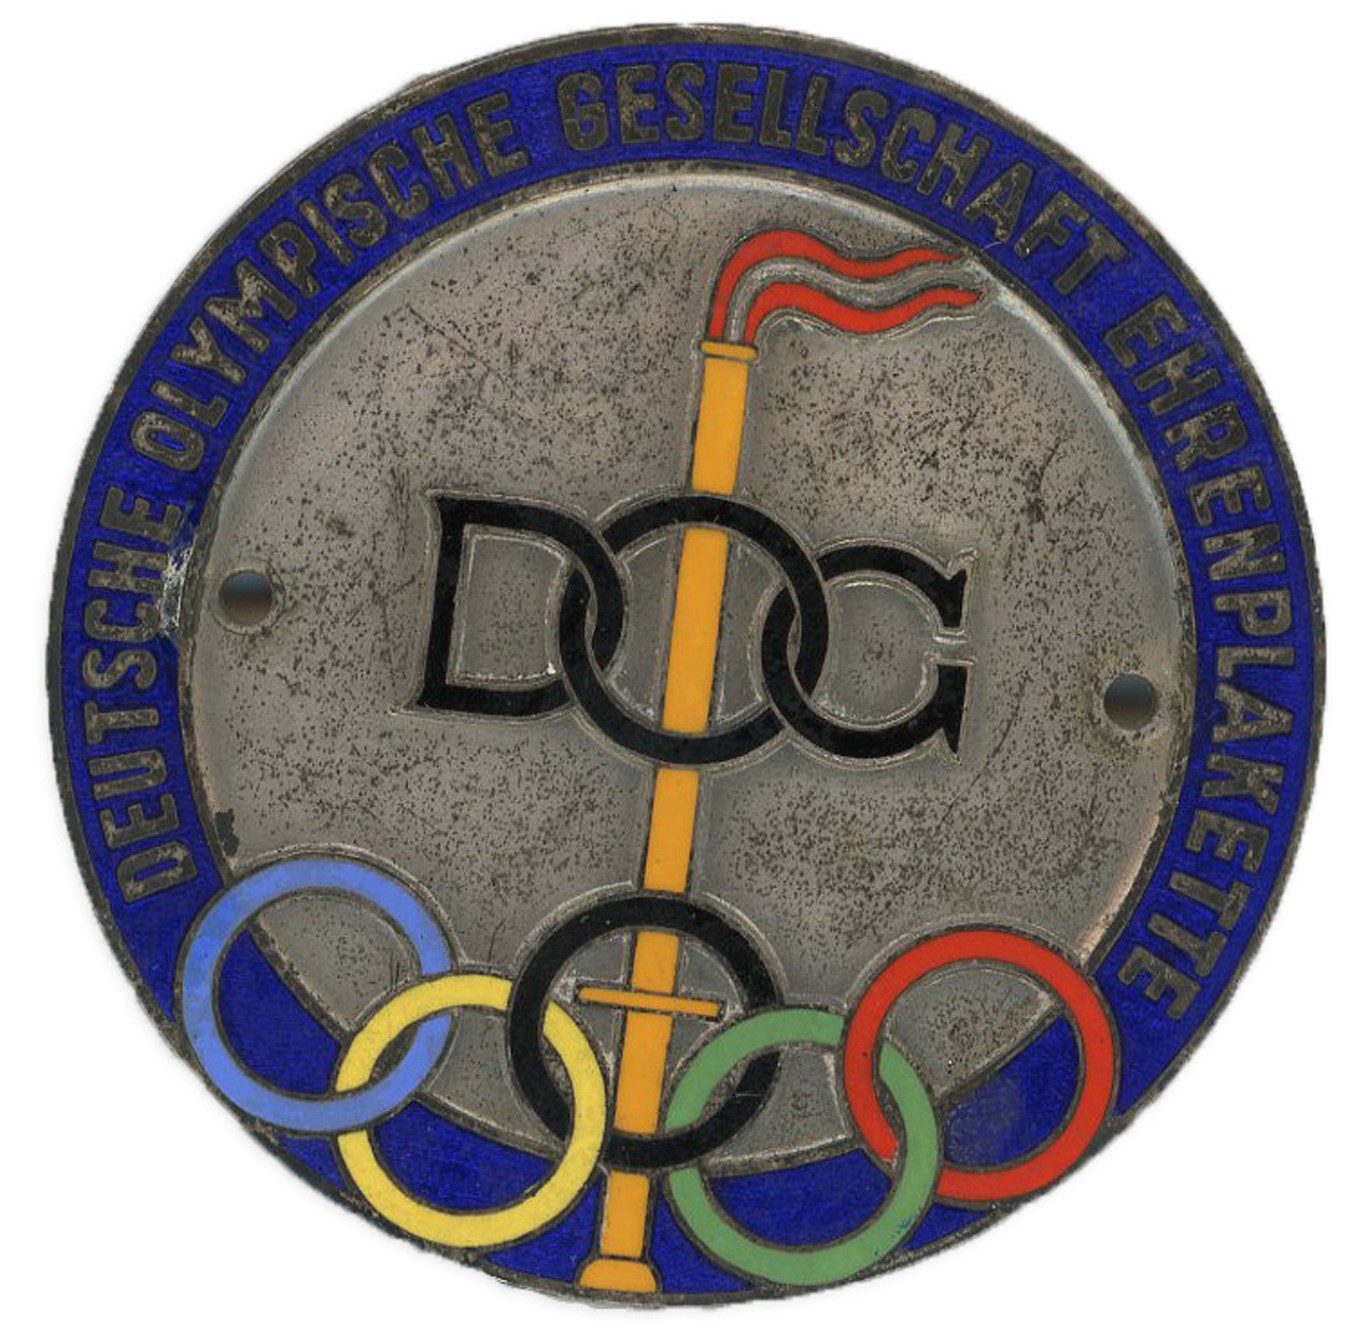 Olympics and All Sports - 1936 Berlin Olympics Enamel Card Badge for "German Olympic Torch Leader"